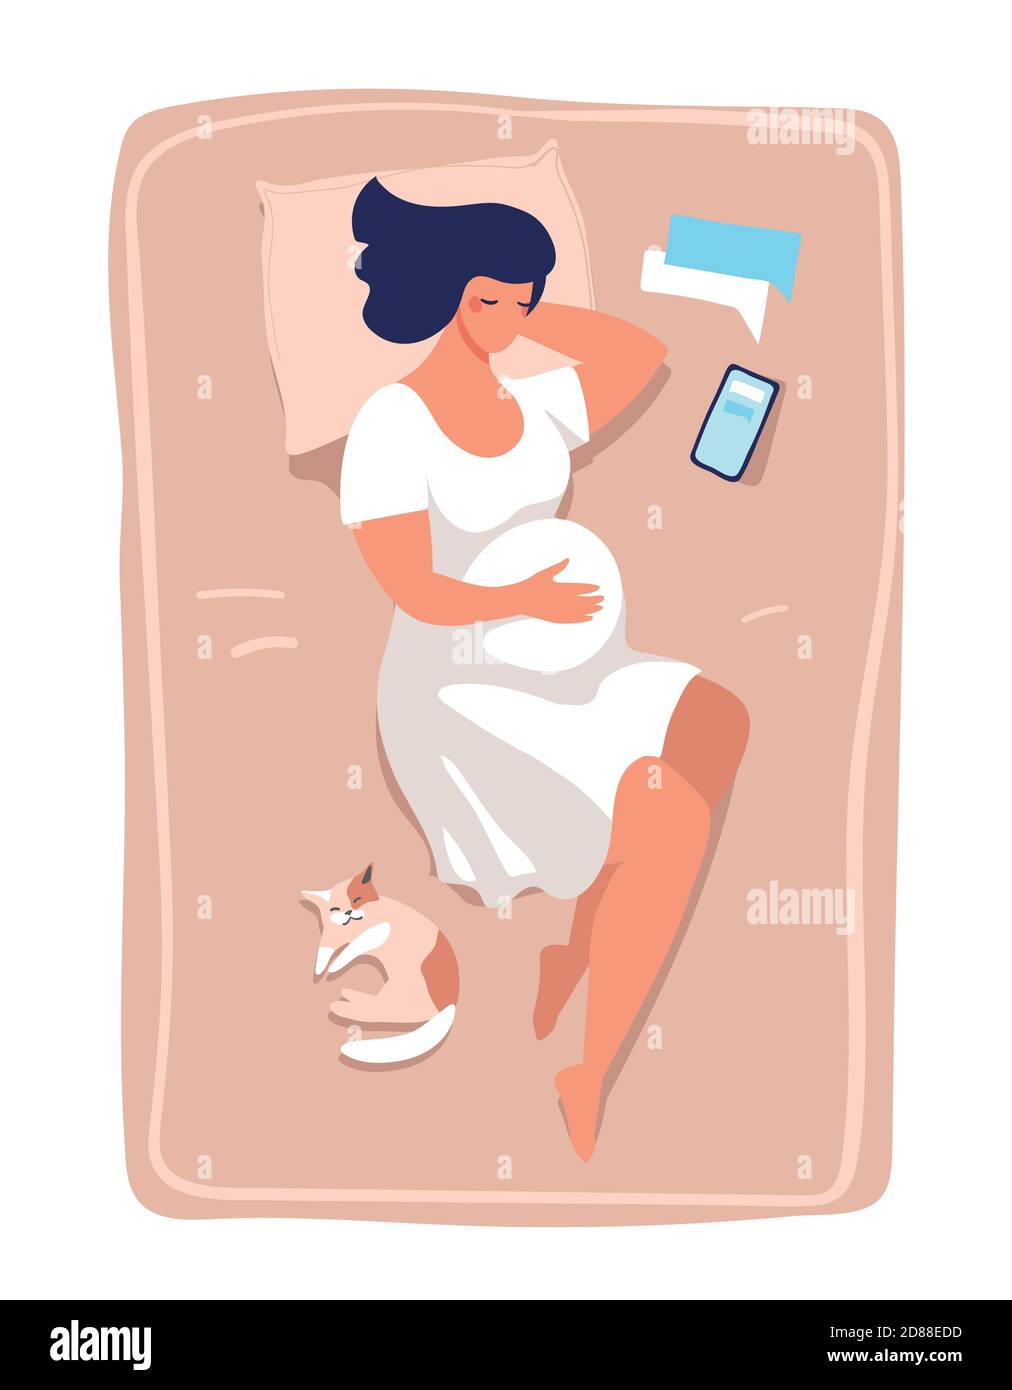 A young pregnant woman lies and sleeps on the bed. Illustration about pregnancy and childbirth, health and relaxation. Flat vector illustration isolated on white background Stock Vector